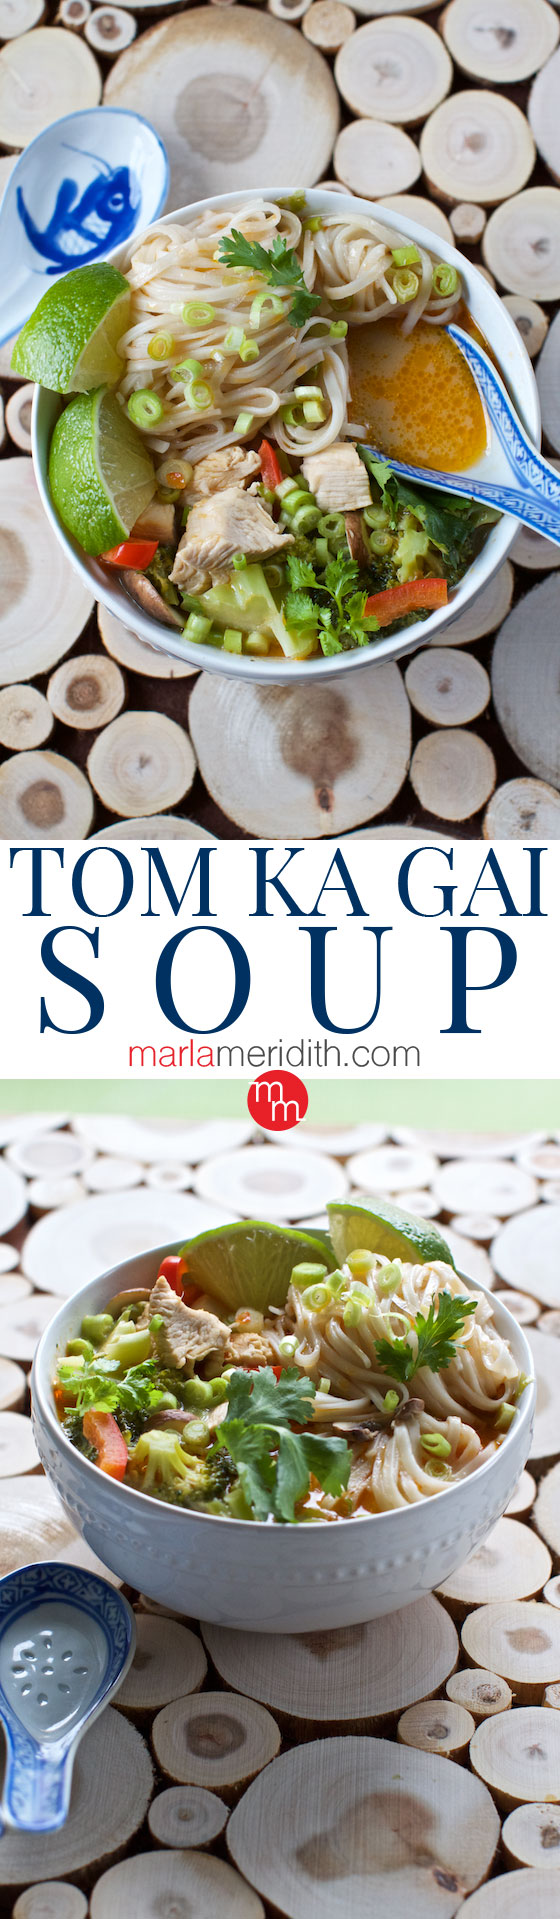 Tom Ka Gai Soup (Thai Coconut Curry Chicken Soup) | Find this delicious recipe on MarlaMeridith.com ( @marlameridith )